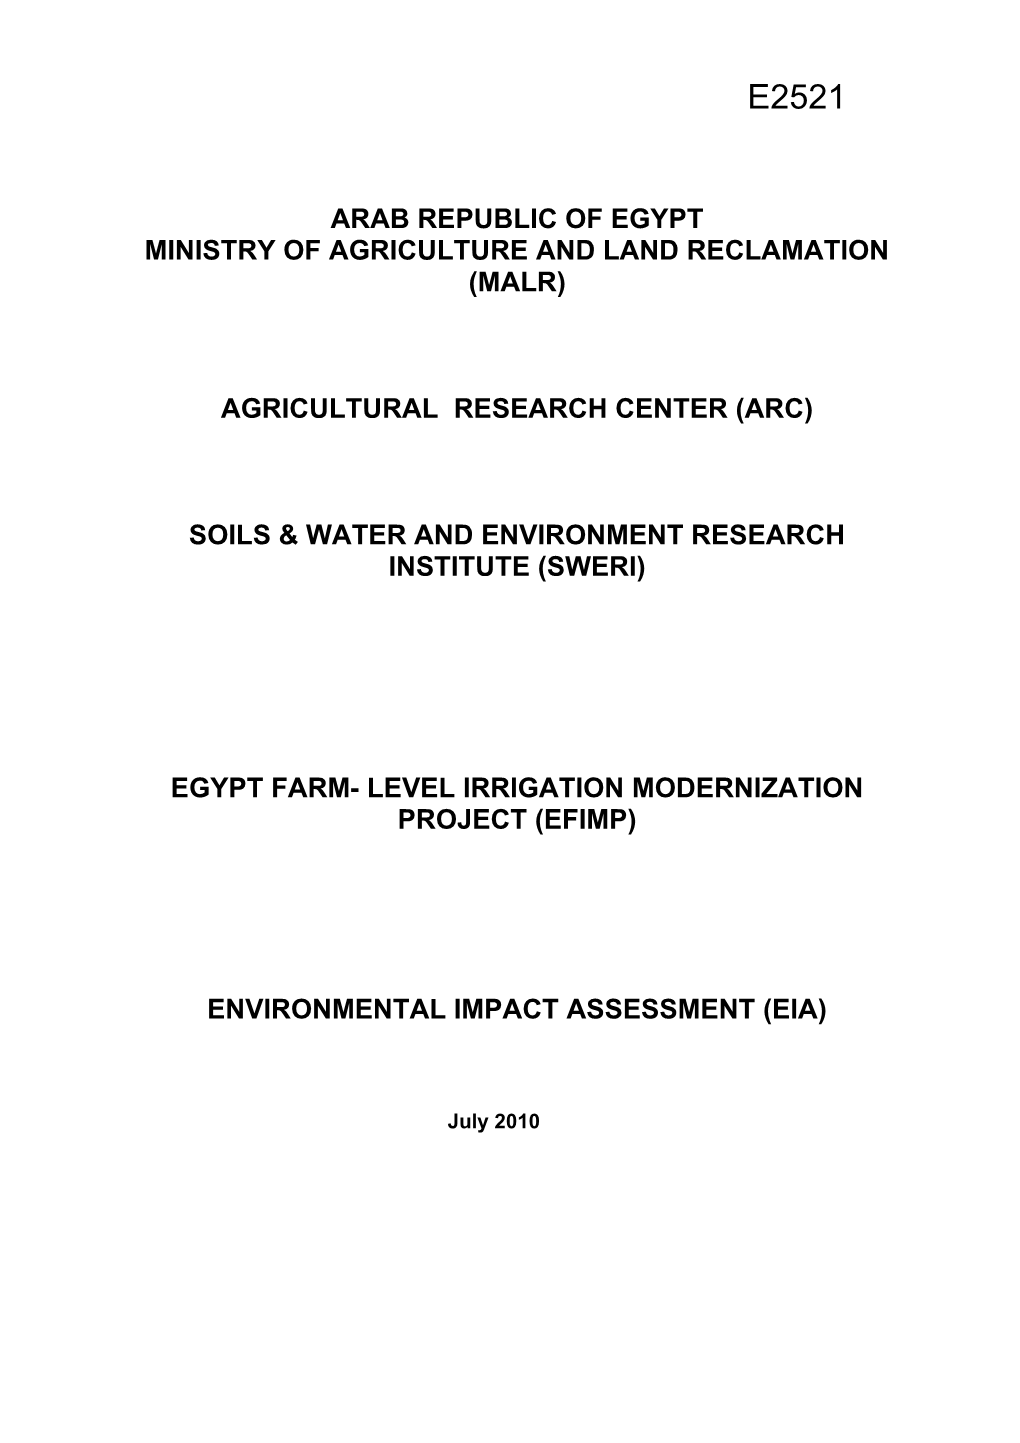 Ministry of Agriculture and Land Reclamation (MALR)